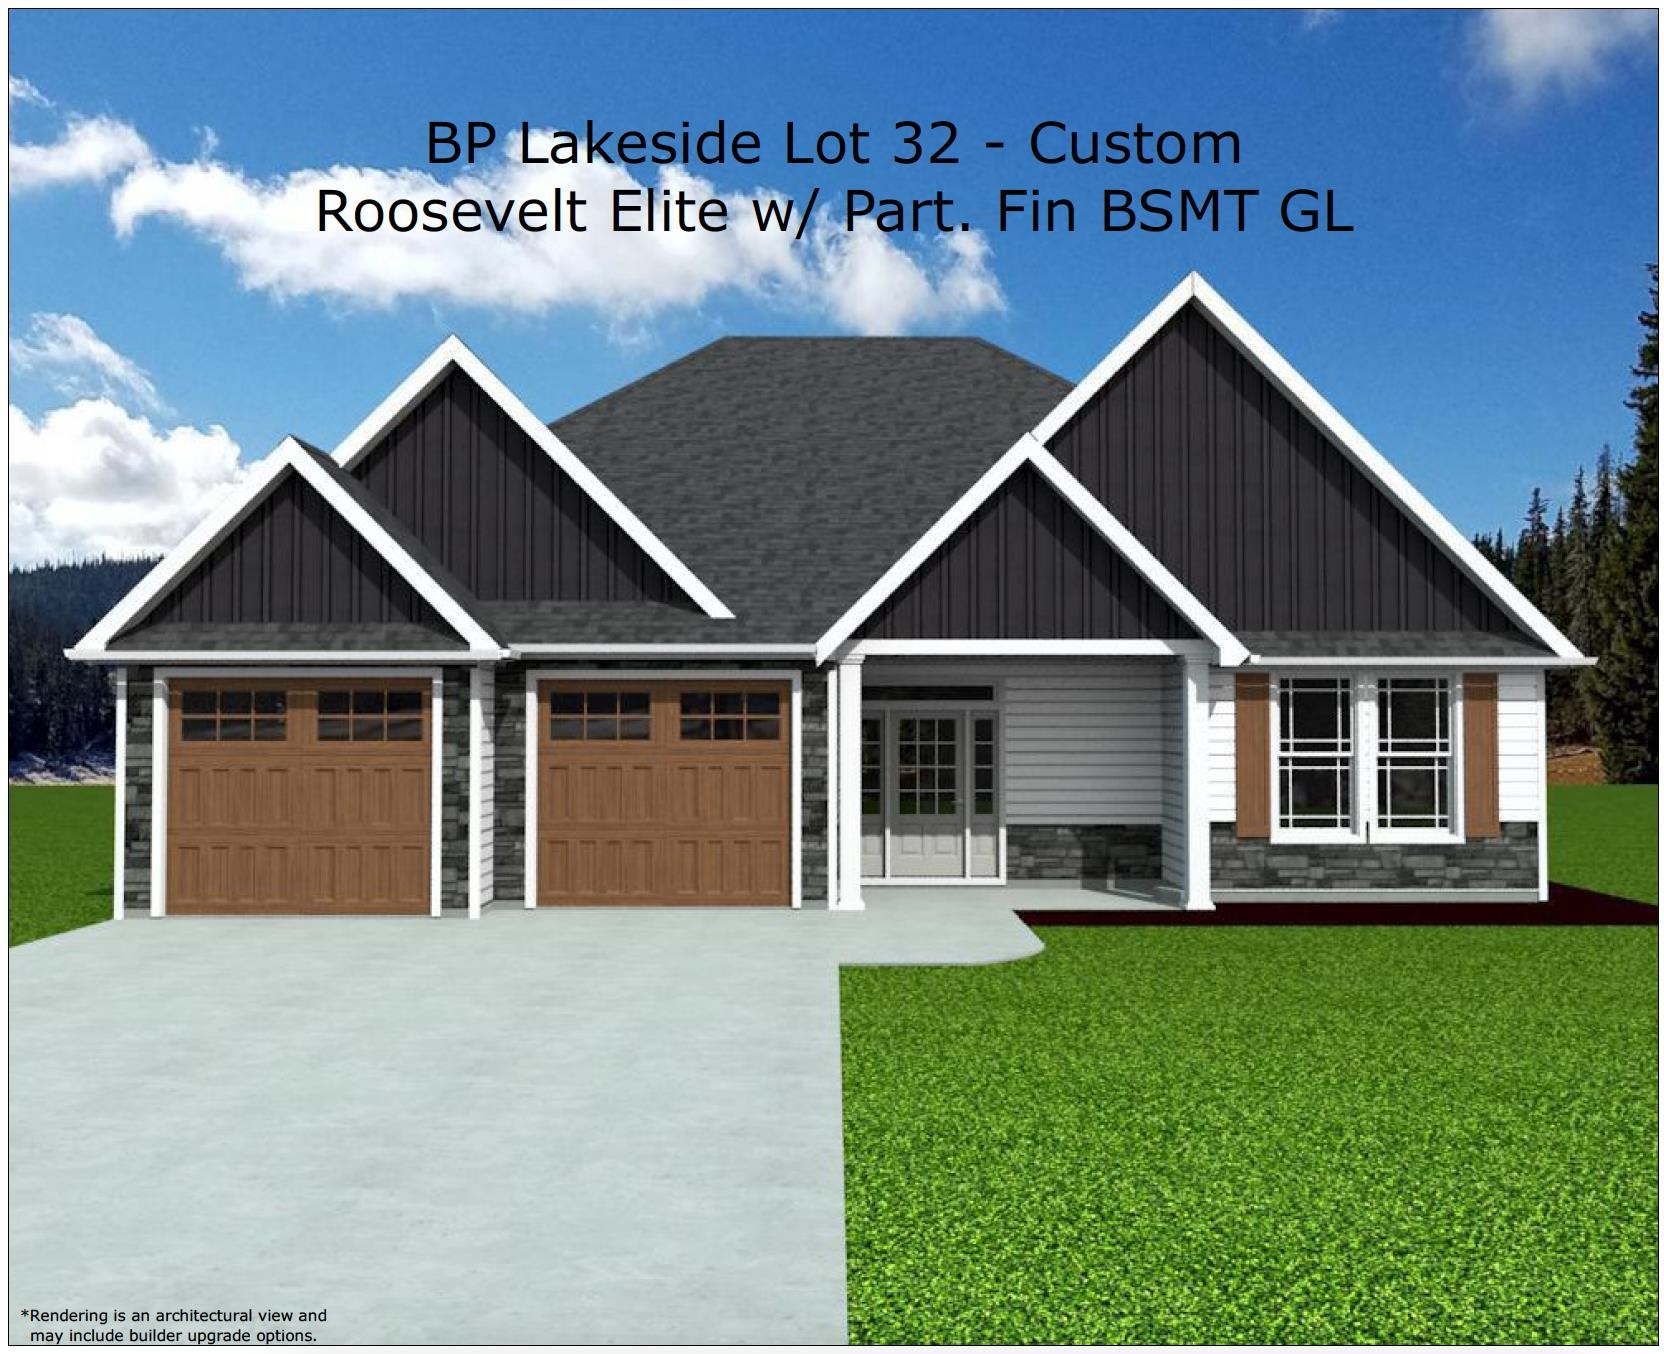 Preferred Lender/Attorney Closing Costs Incentive Offered!  Custom Roosevelt Elite floor plan, with partial finished basement. Lot 32  Contact Steven Long with questions. 864-978-3104